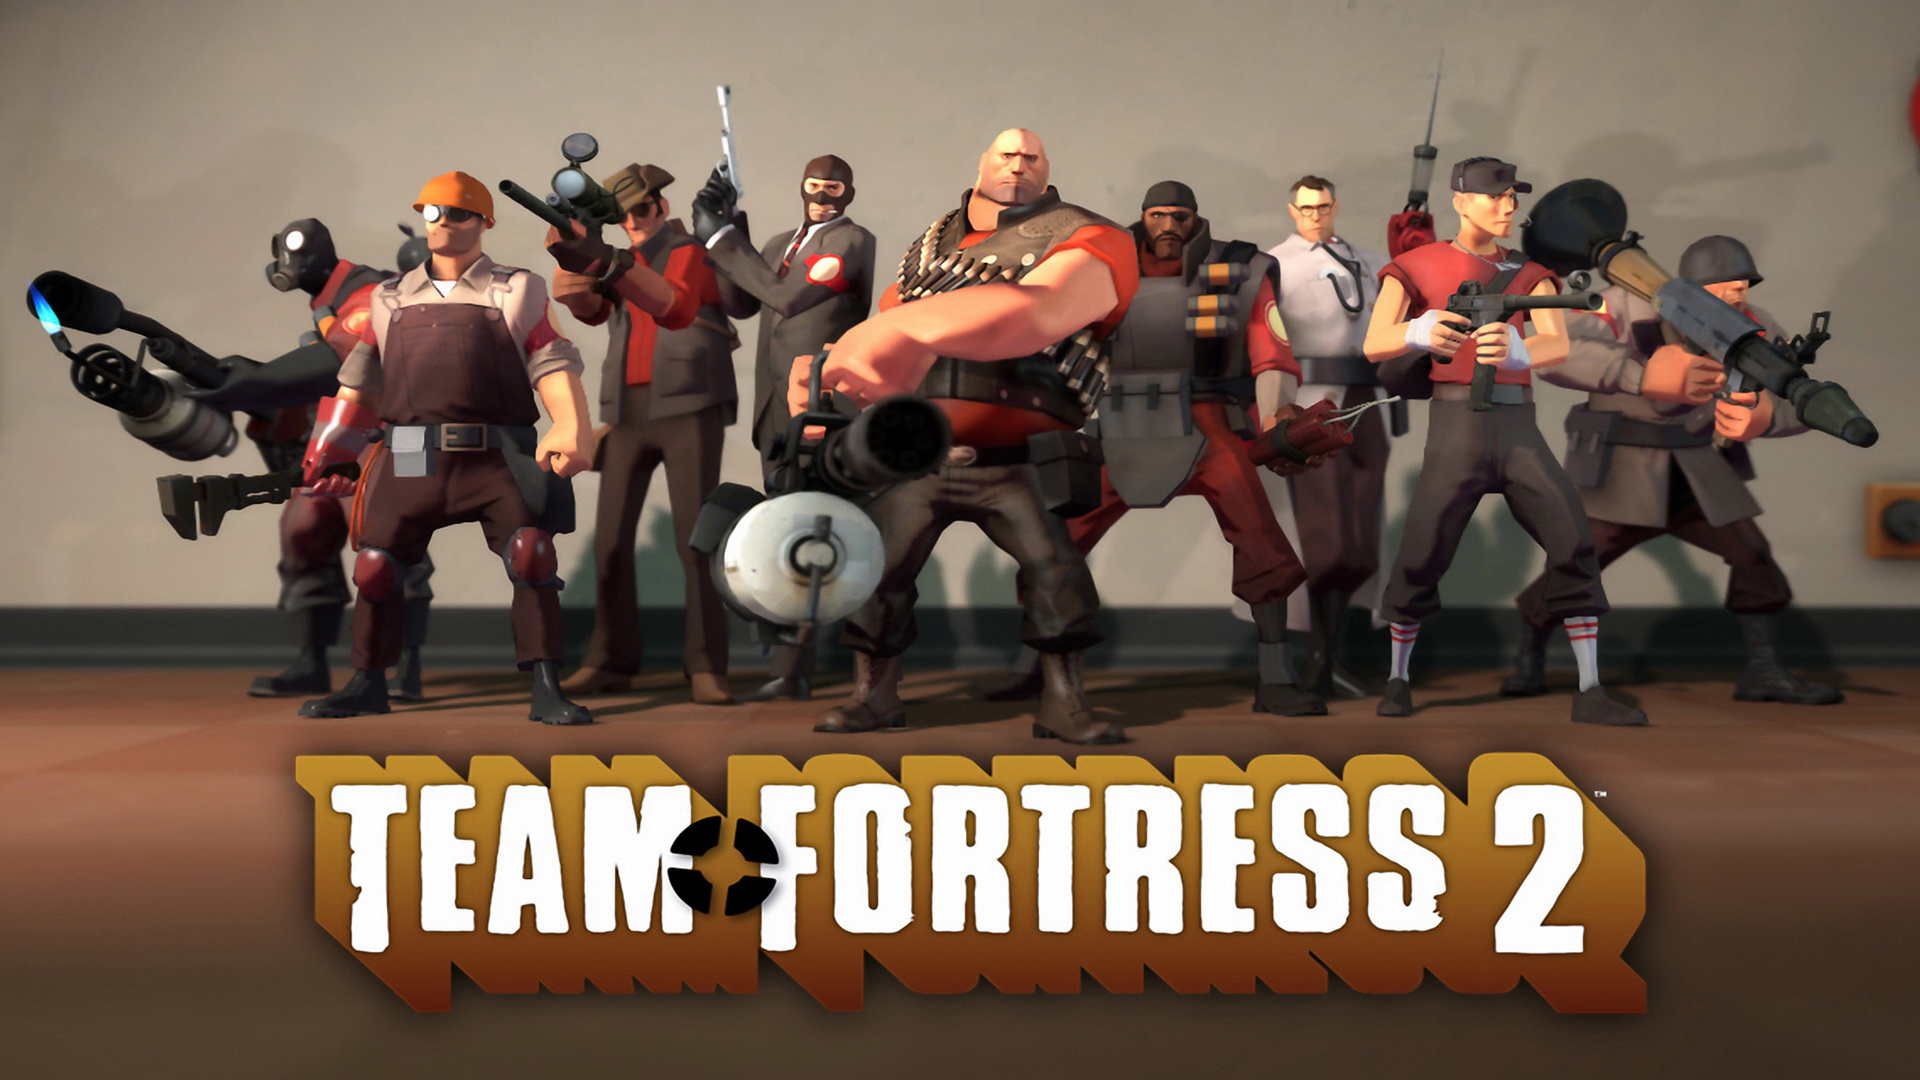 Two hours of Team Fortress 2